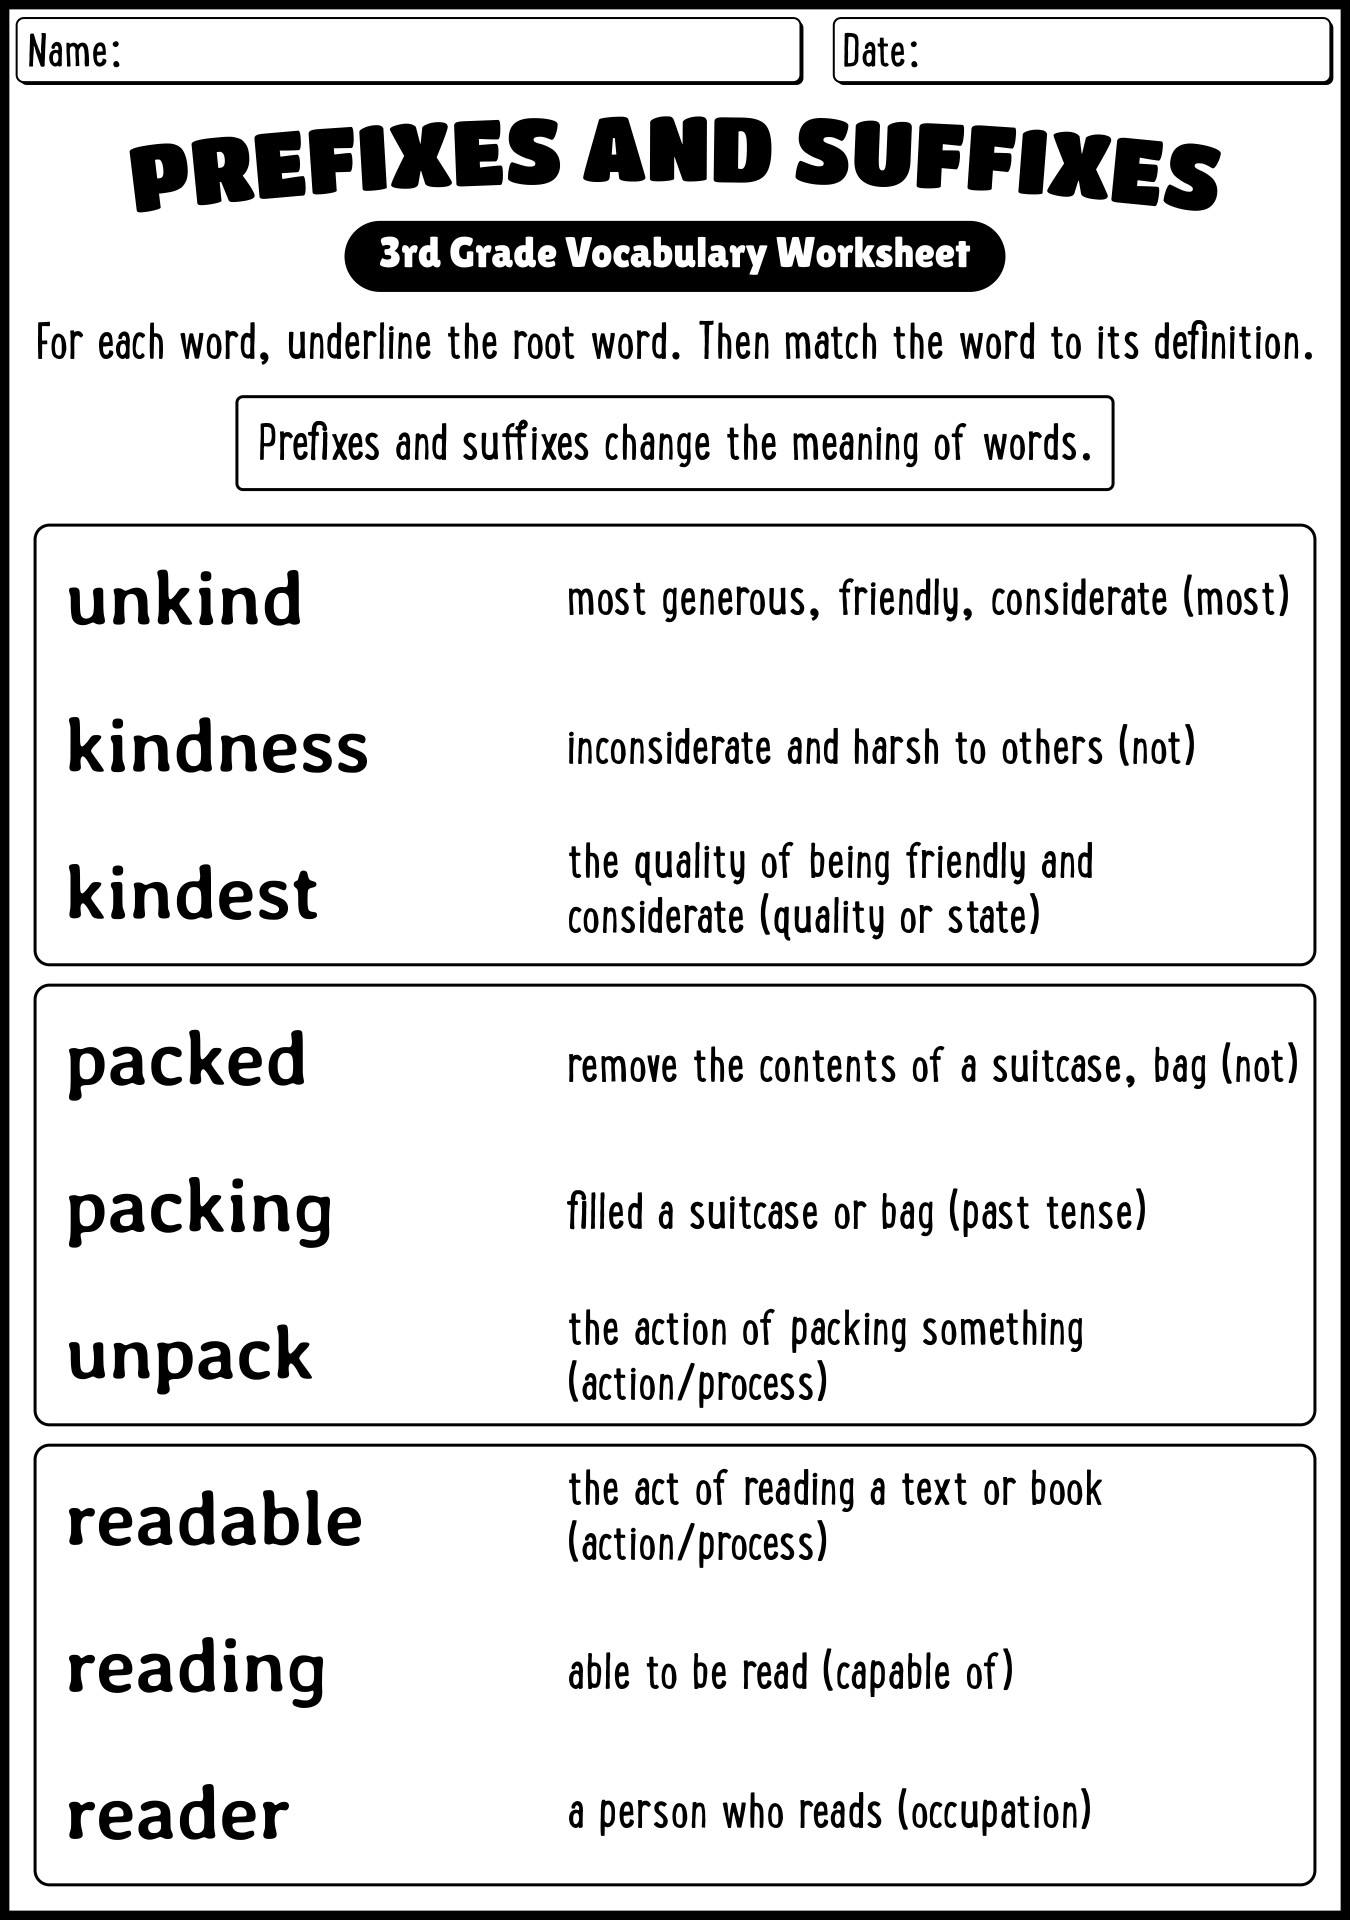 13 Best Images of Roots Prefixes And Suffixes Worksheets - Prefix